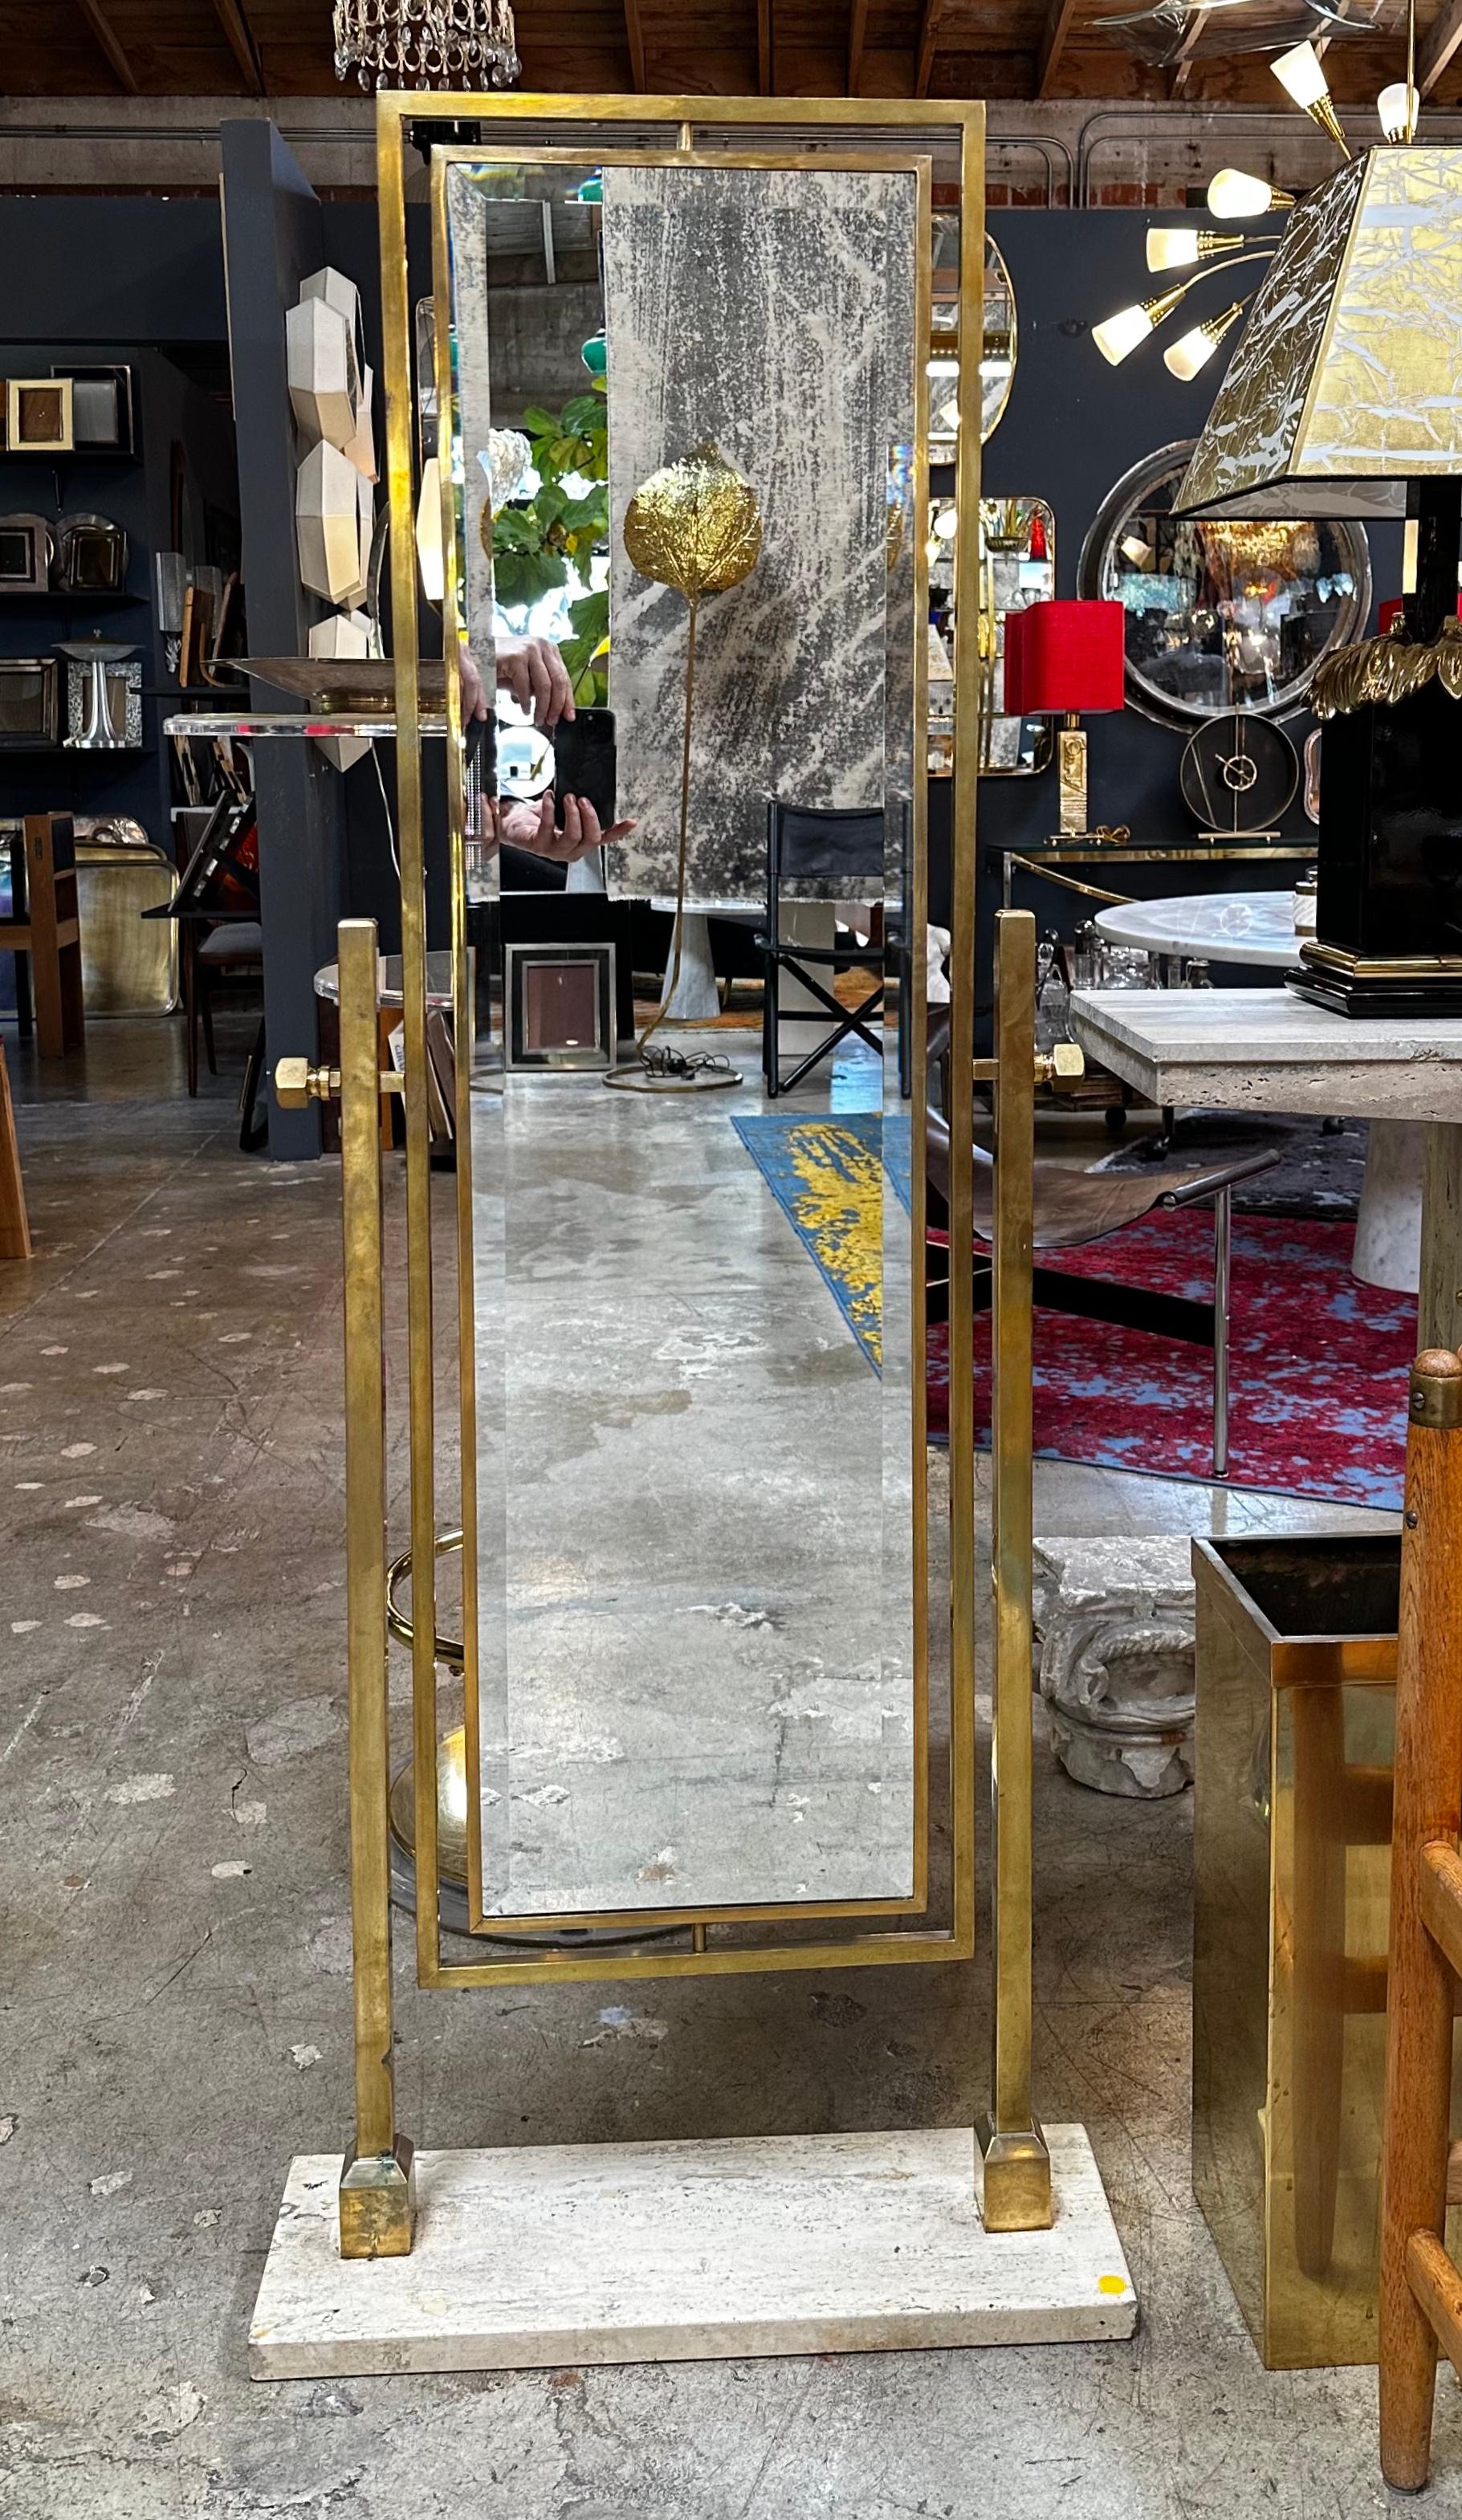 This stunning floor mirror is a vintage piece of Italian design, crafted in the 1980s. The mirror features a sleek and stylish brass frame that is adjustable, allowing you to customize the angle to your liking. The base of the mirror is made of